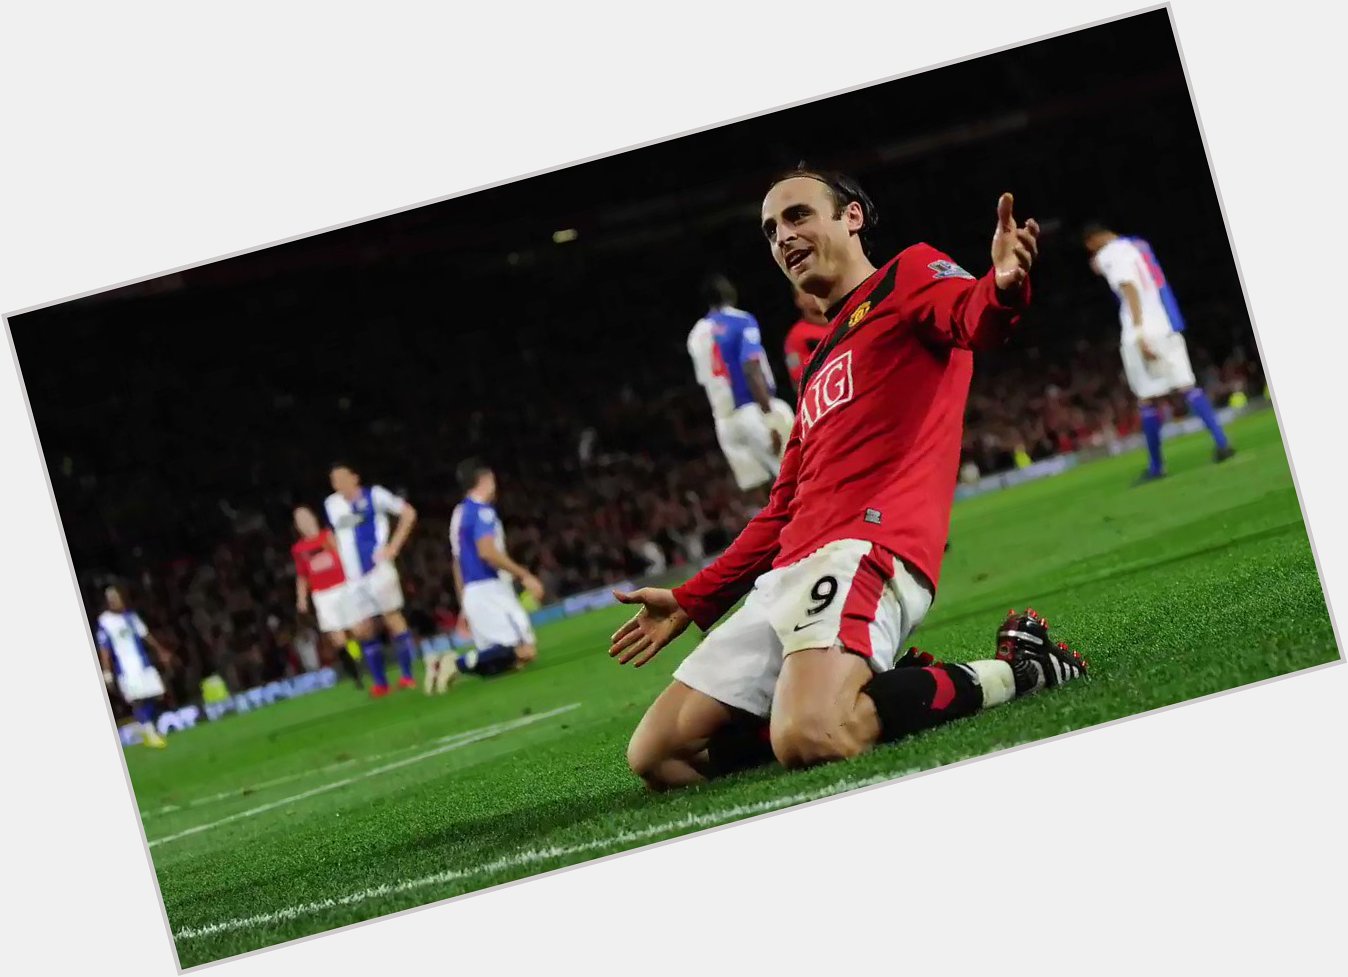   Dimitar Berbatov was outrageous Happy birthday to one of the classiest players of all time 